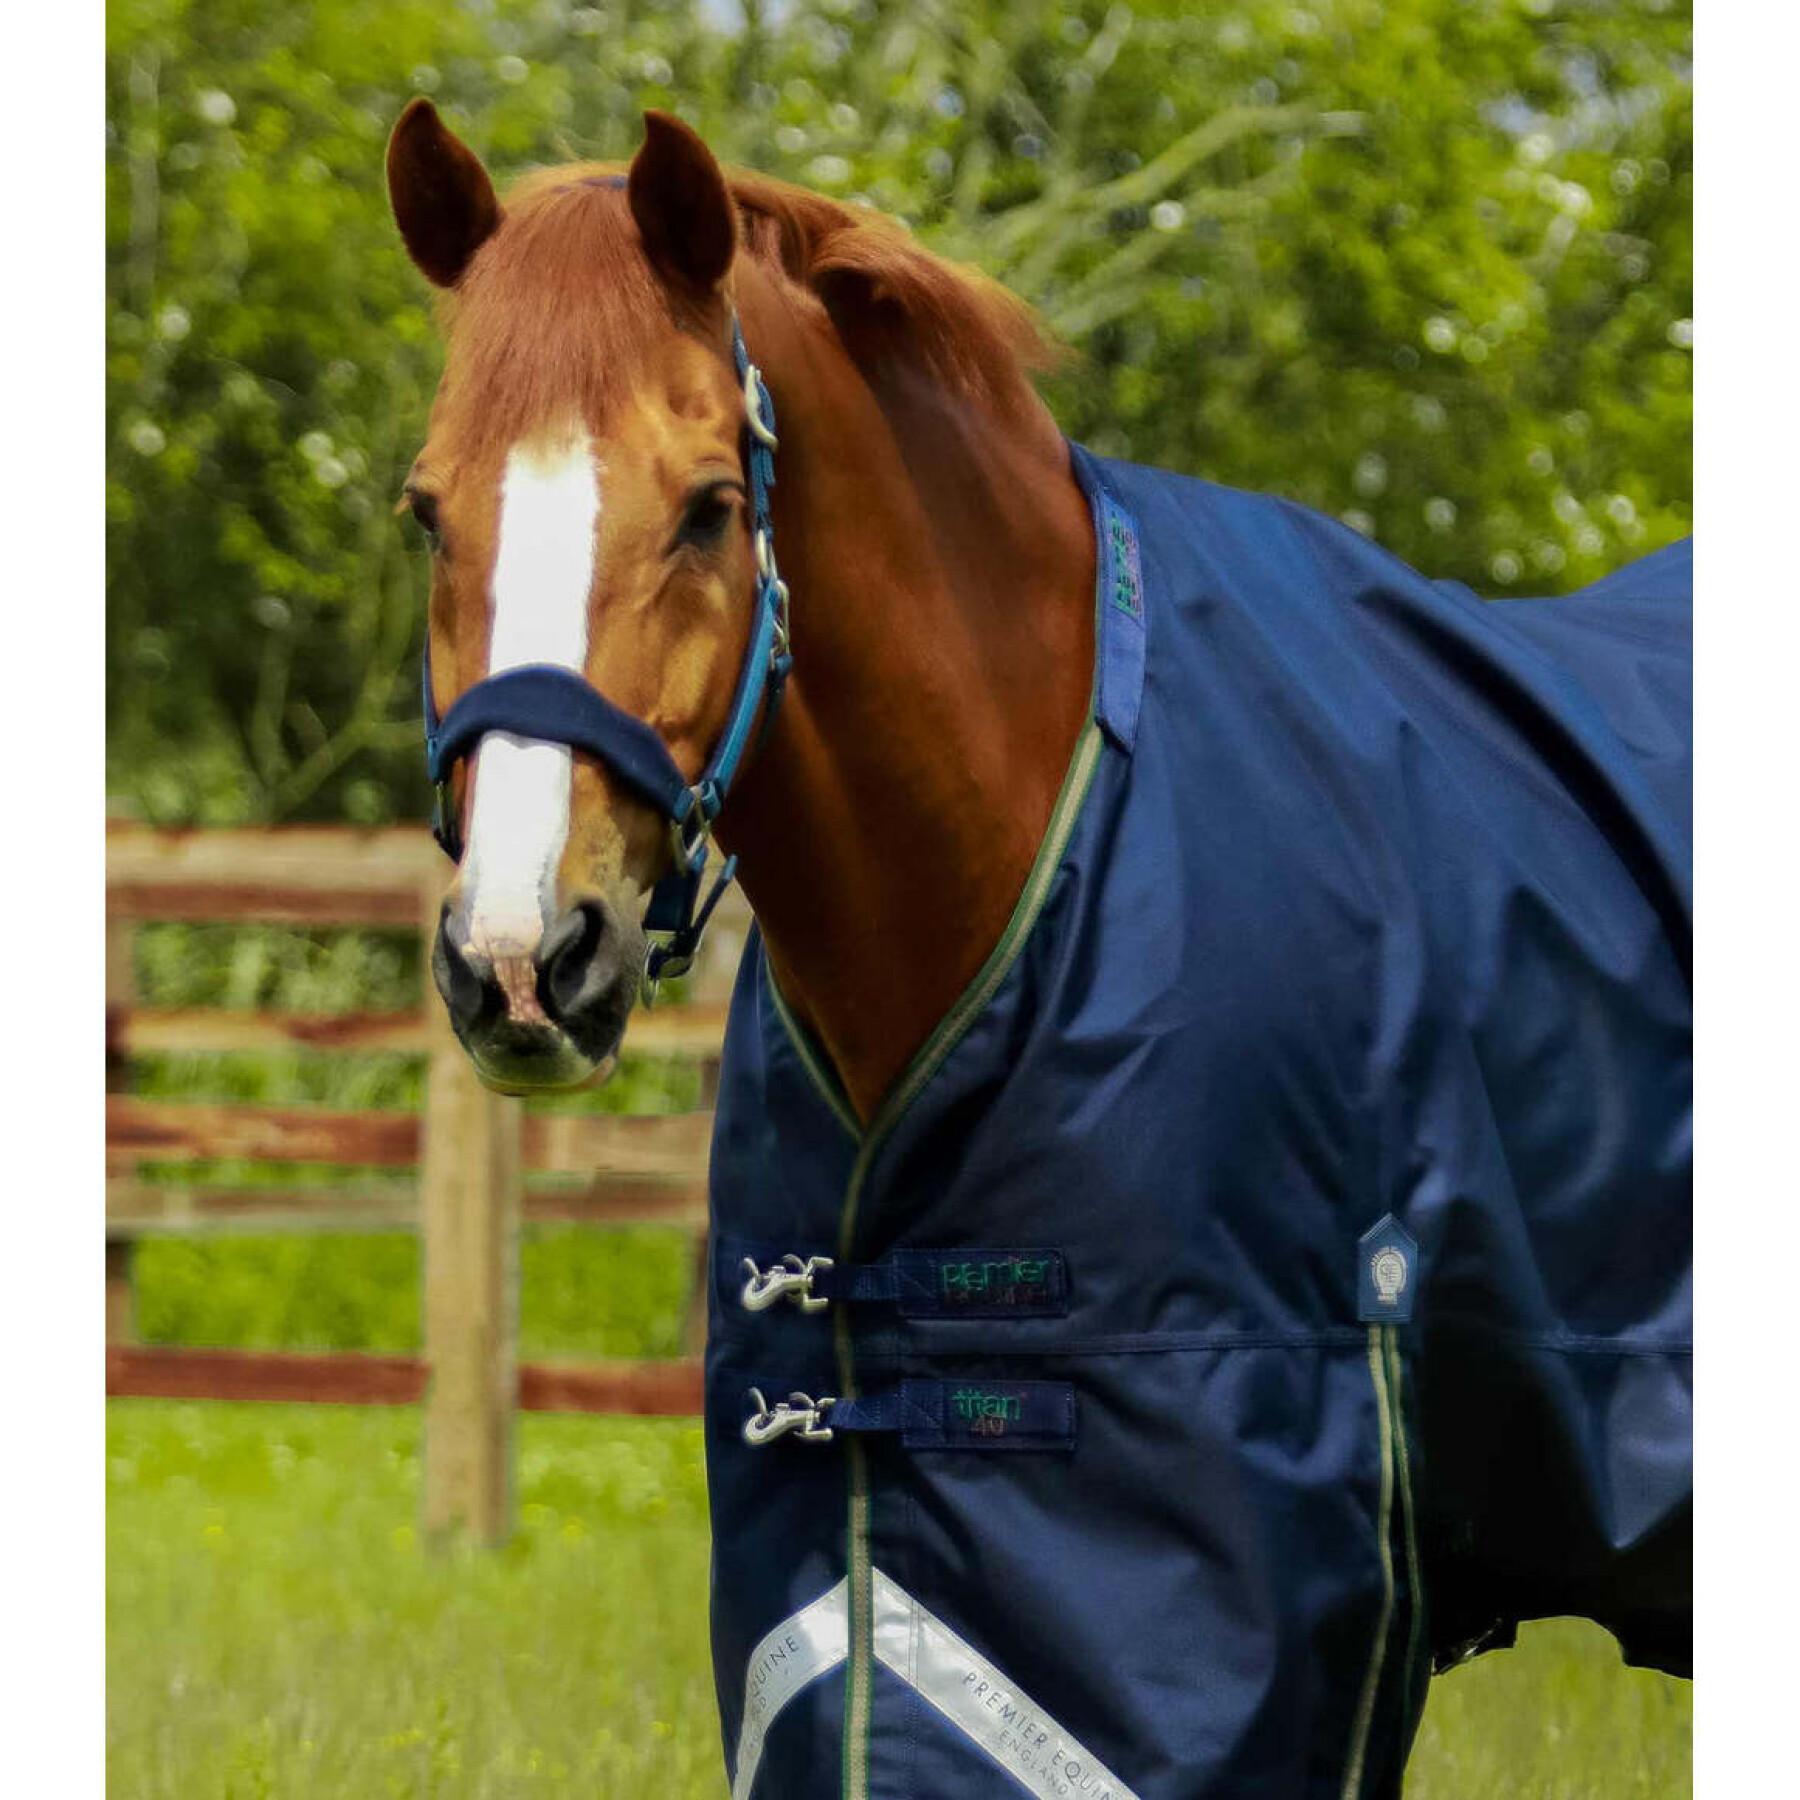 Outdoor horse blanket with neck cover Premier Equine Titan 40 g